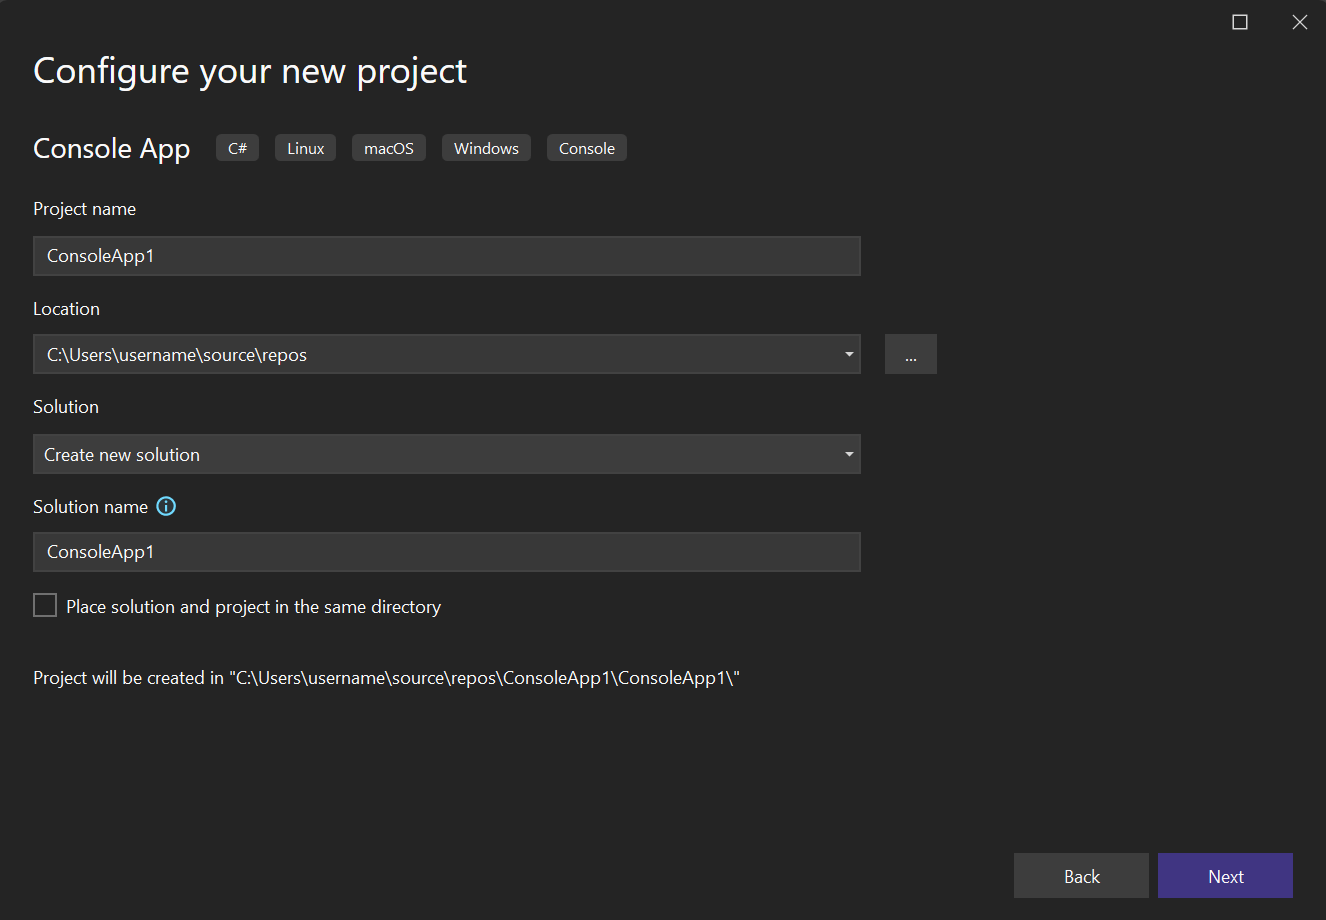 Screenshot of the Configure a new project window in Visual Studio 2022, where you enter the name of the project and the project location.